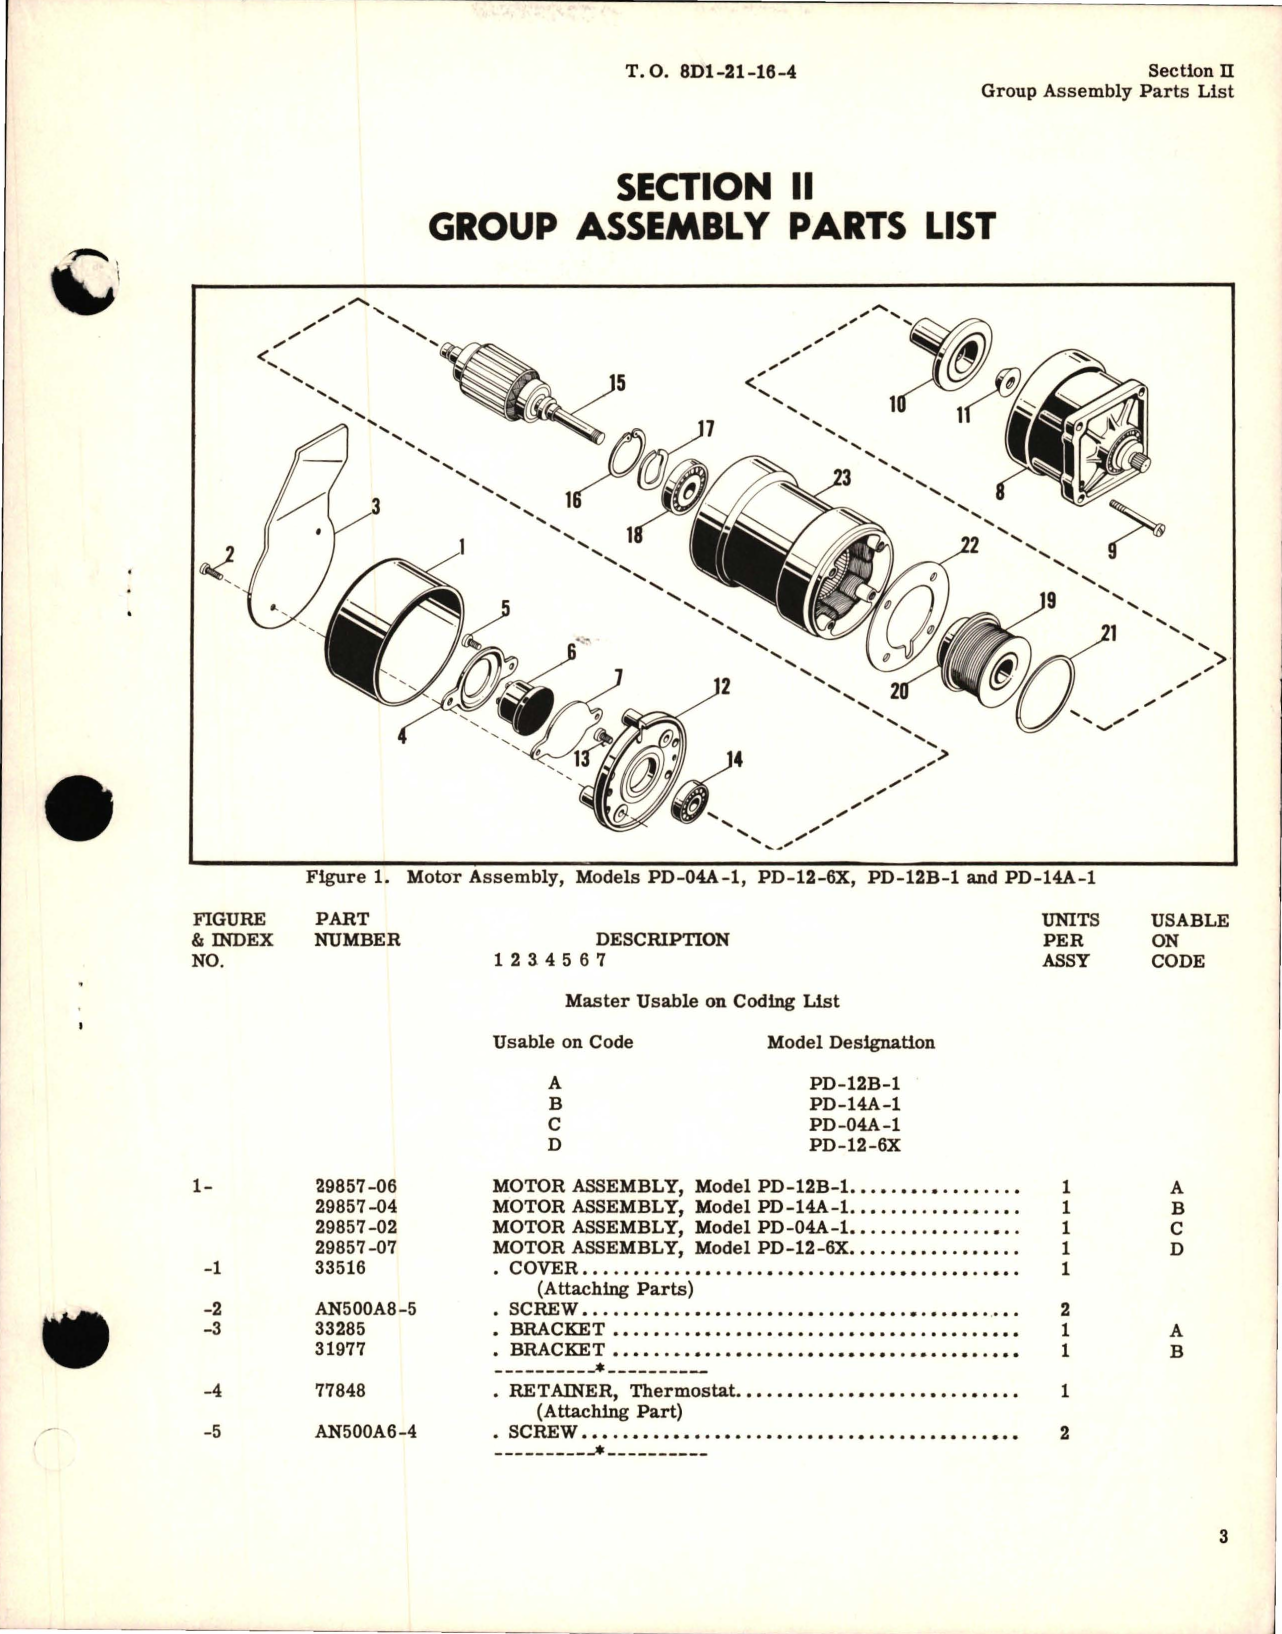 Sample page 5 from AirCorps Library document: Illustrated Parts Breakdown for Fractional Horsepower Electric Motors - P Frame Series